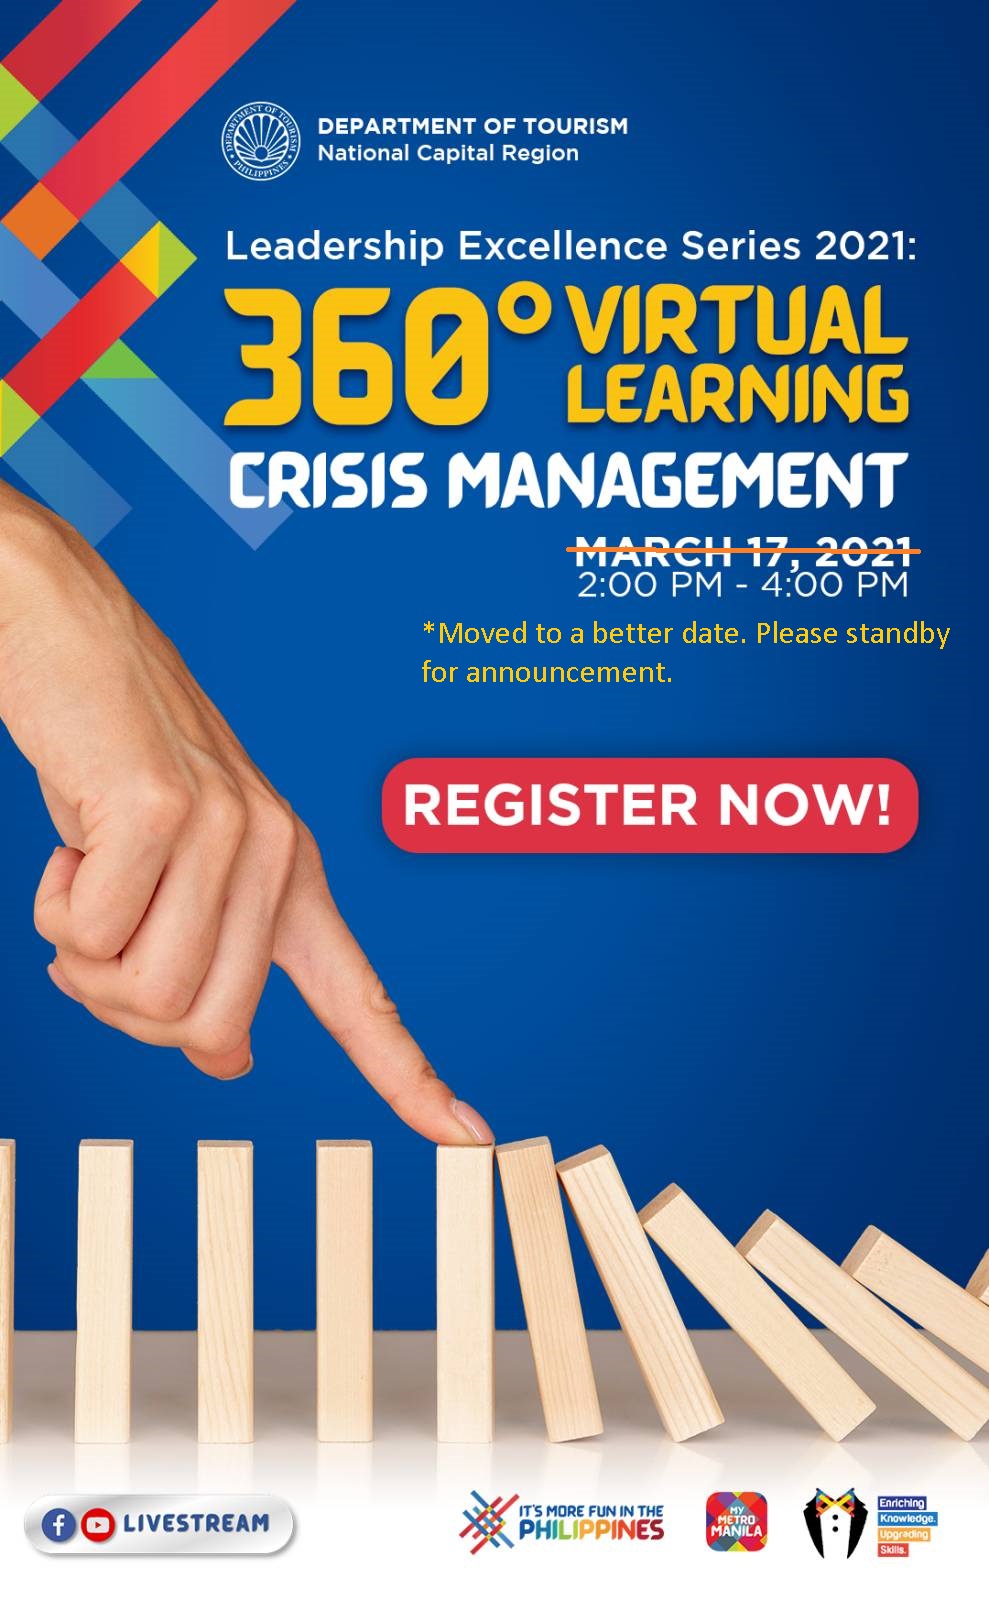 DOT-NCR Leadership Excellence Series 2021: A 360° Virtual Learning Experience - Crisis Management (March 17, 2021)